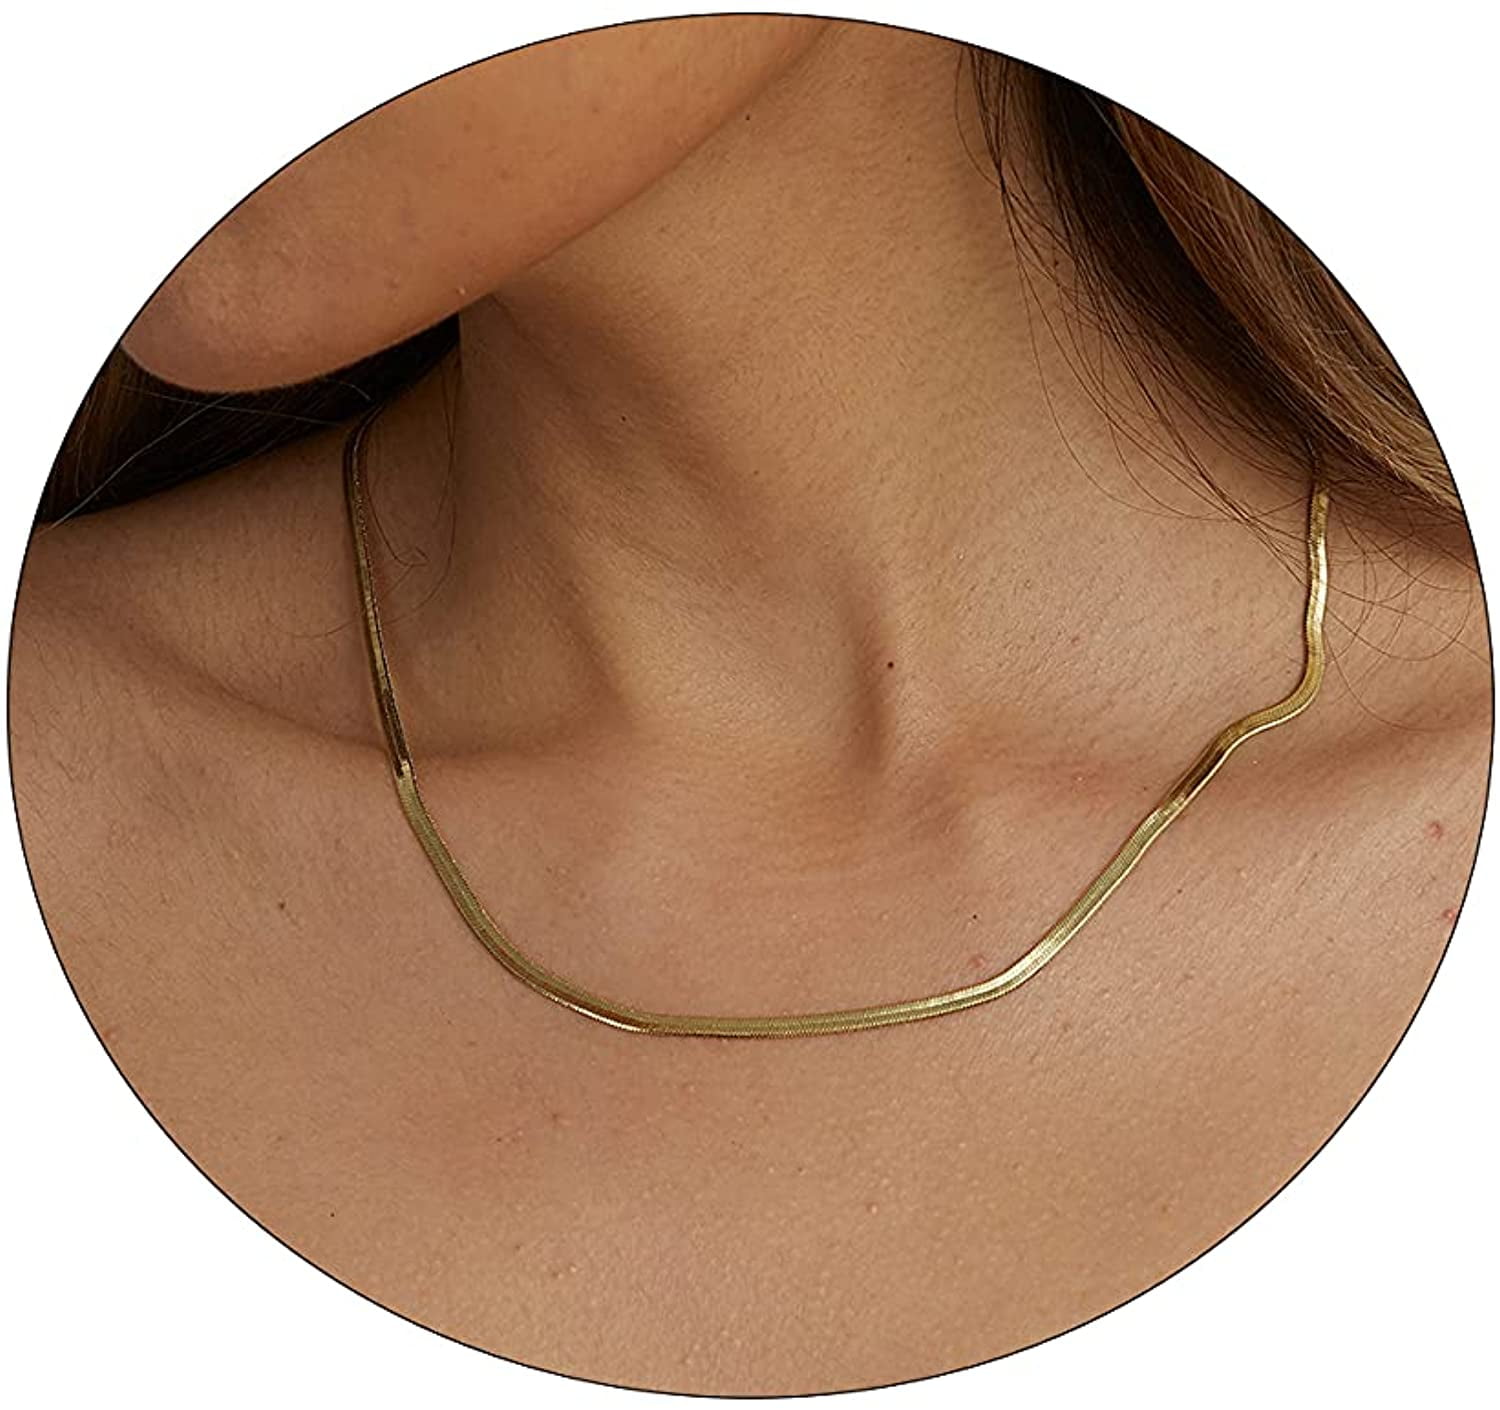 Gold Plated Snake Bone Chain String Clavicle Distribution Chain Wave Elegant 